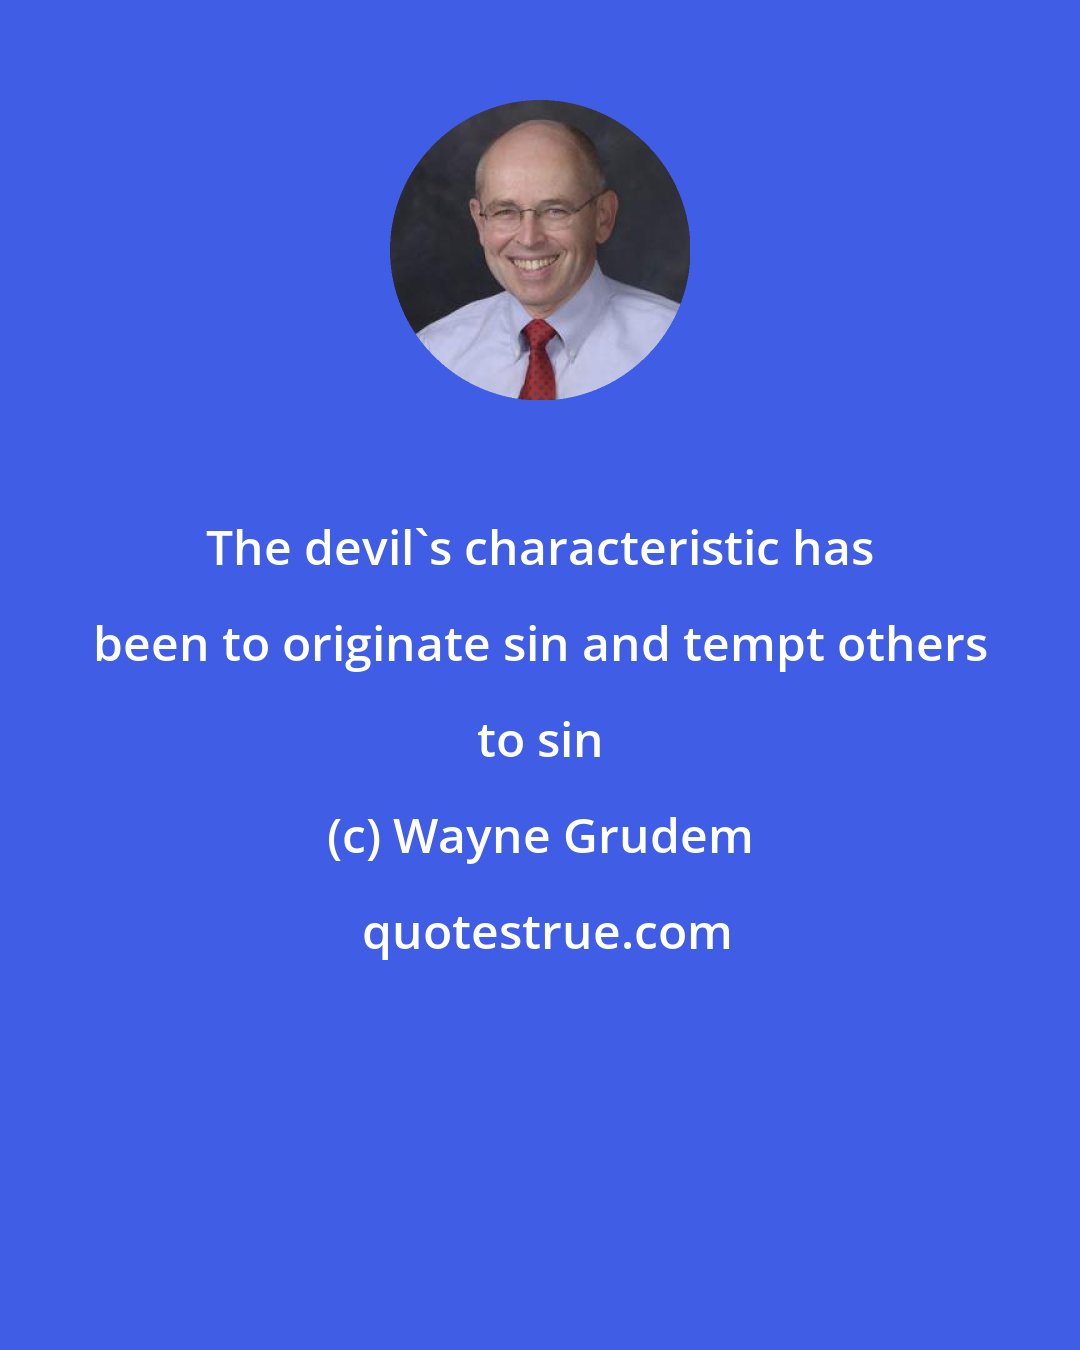 Wayne Grudem: The devil's characteristic has been to originate sin and tempt others to sin